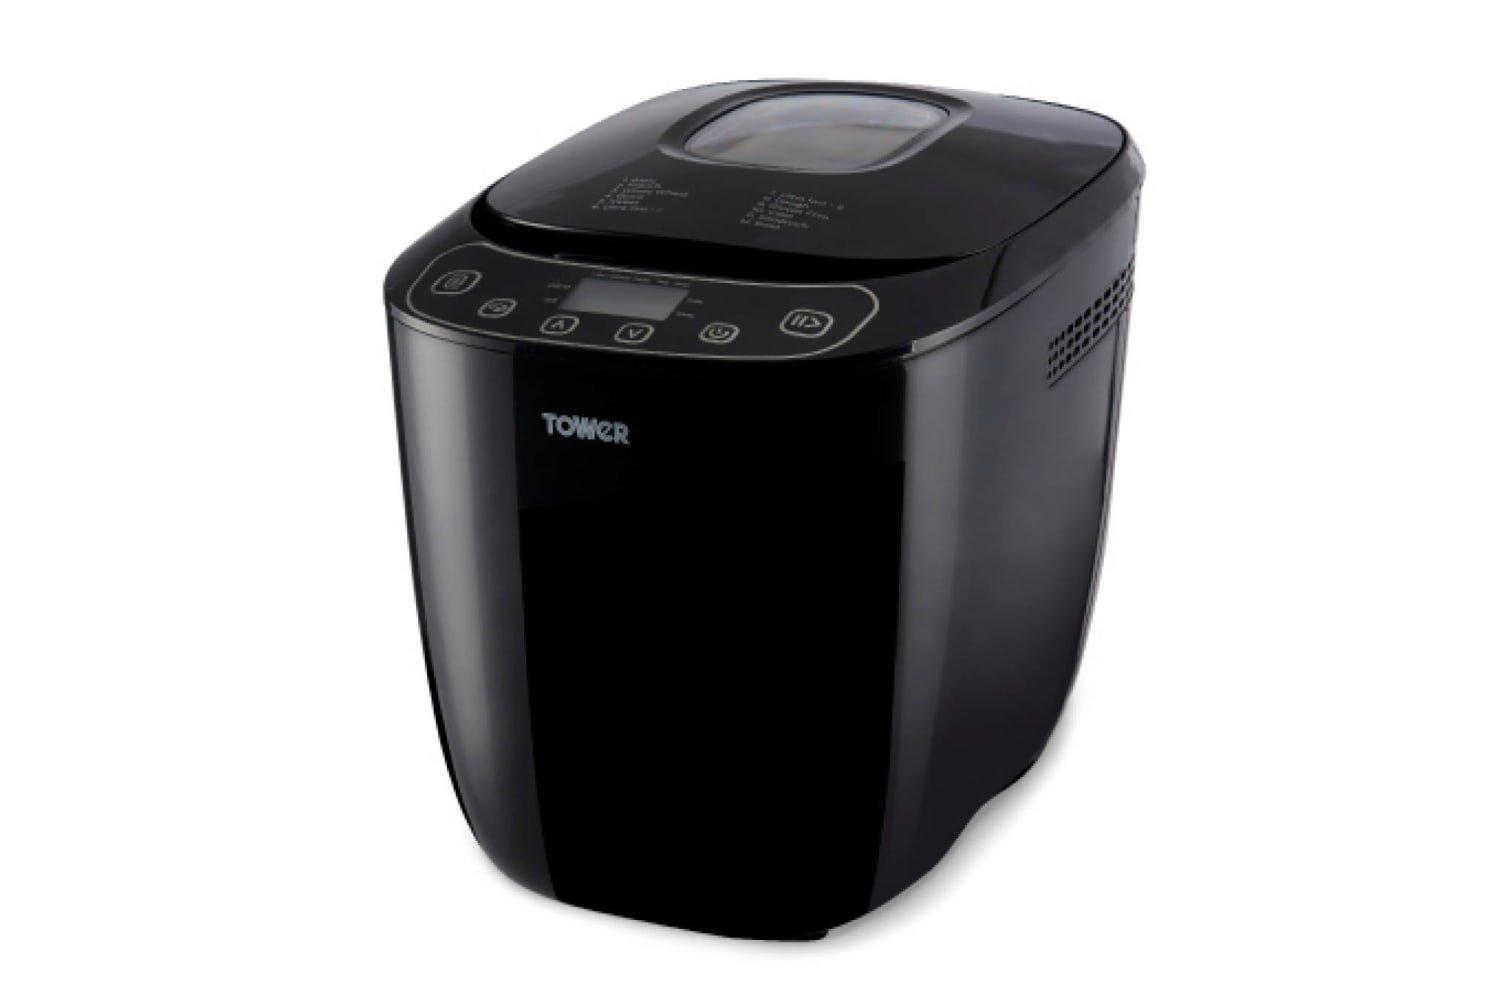 Tower T11003 Bread Maker with 12 programmes - Black